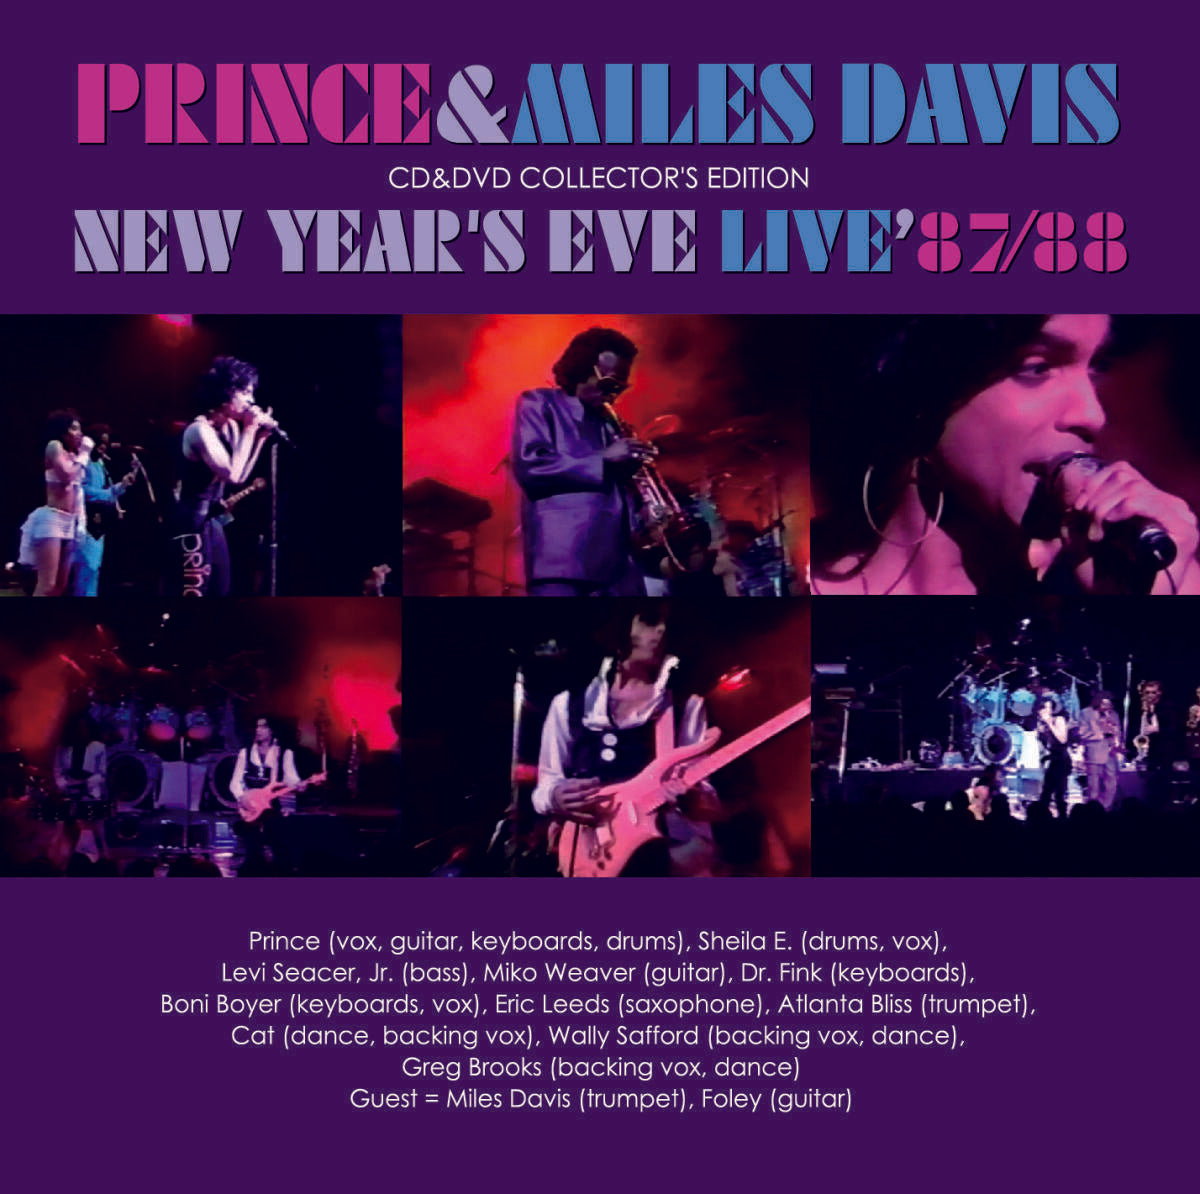 PRINCE & MILES DAVIS New Year's Eve Live '87/88 CD DVD Collector's